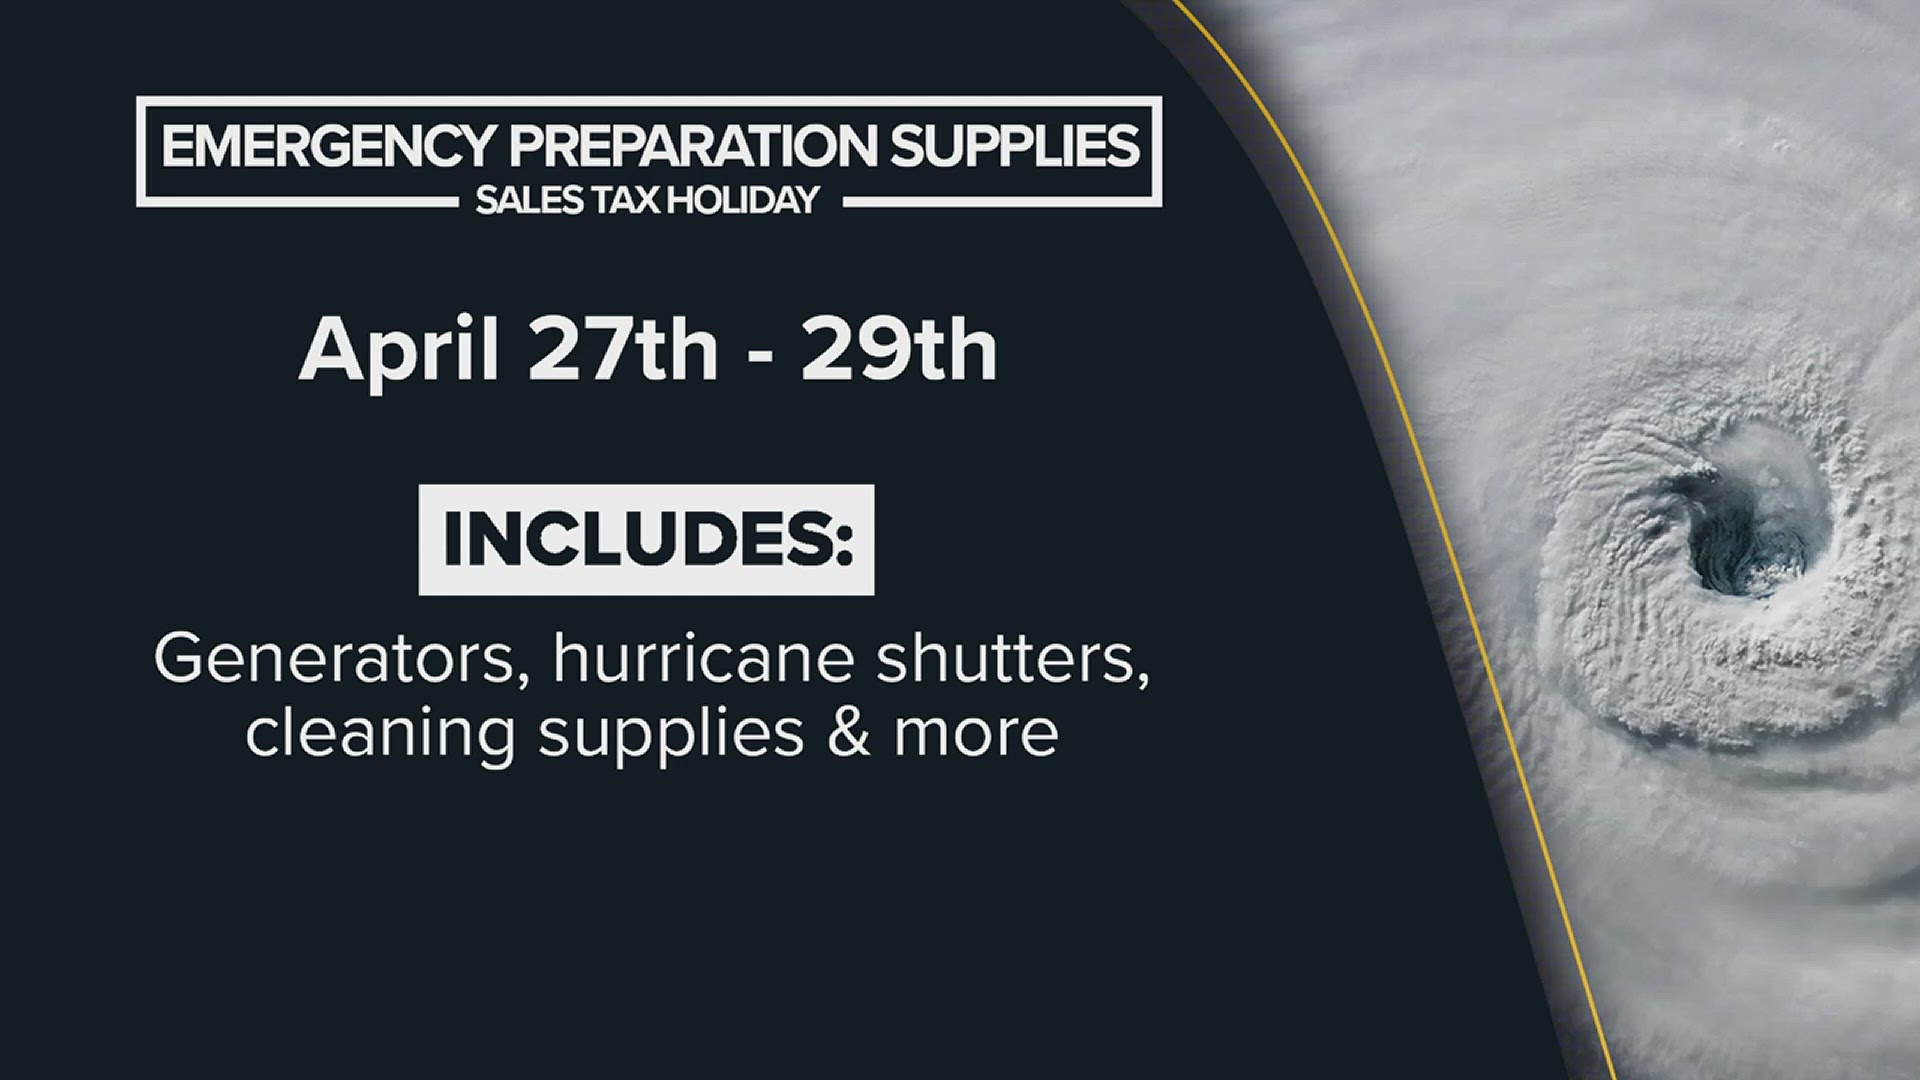 Items you can buy include portable generators, emergency ladders, hurricane shutters, fire extinguishers and more.